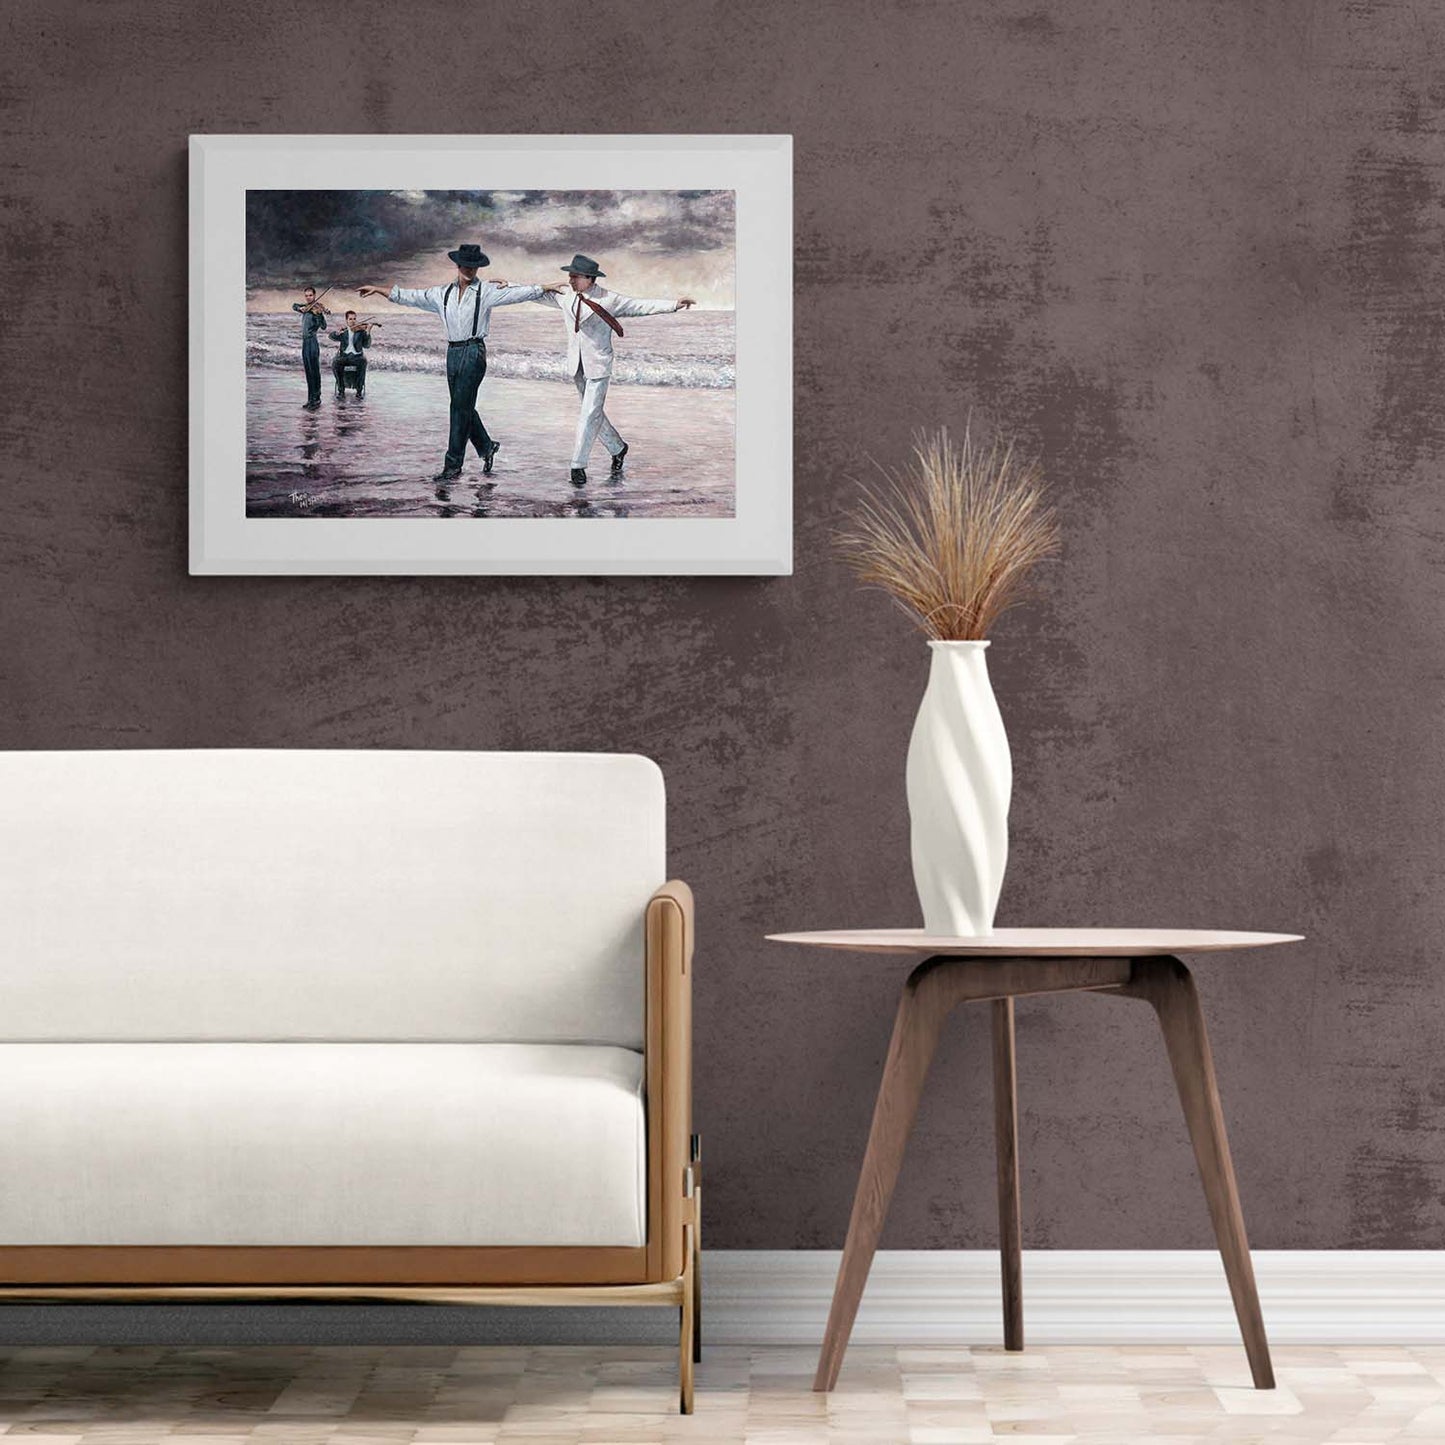 Dance painting by the beach by Theo Michael titled The Beach Quartet